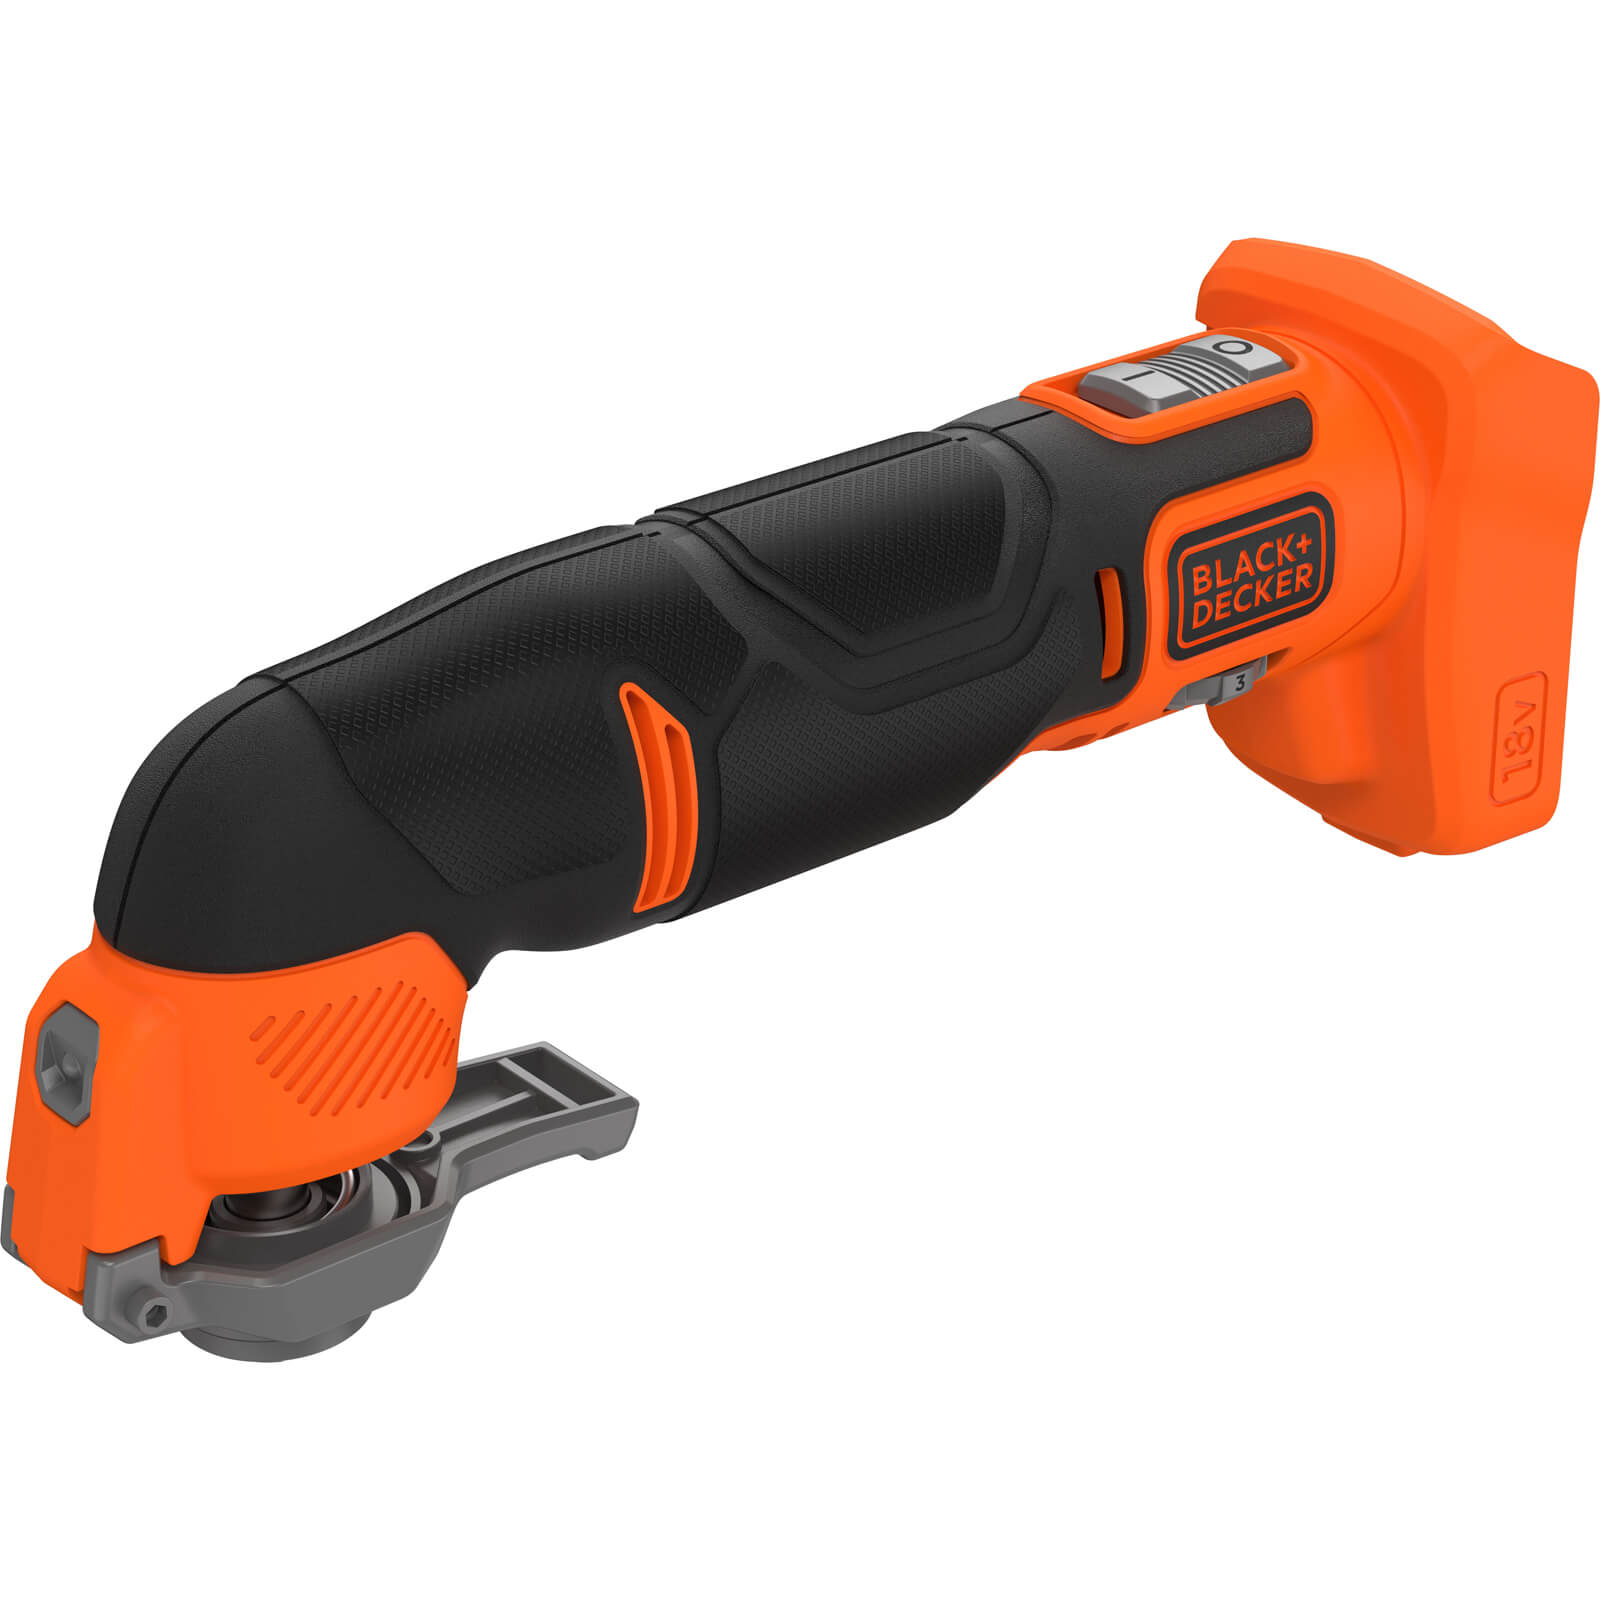 Black and Decker BDCOS18 18v Cordless Oscillating Multi Tool No Batteries No Charger No Case with Accessories